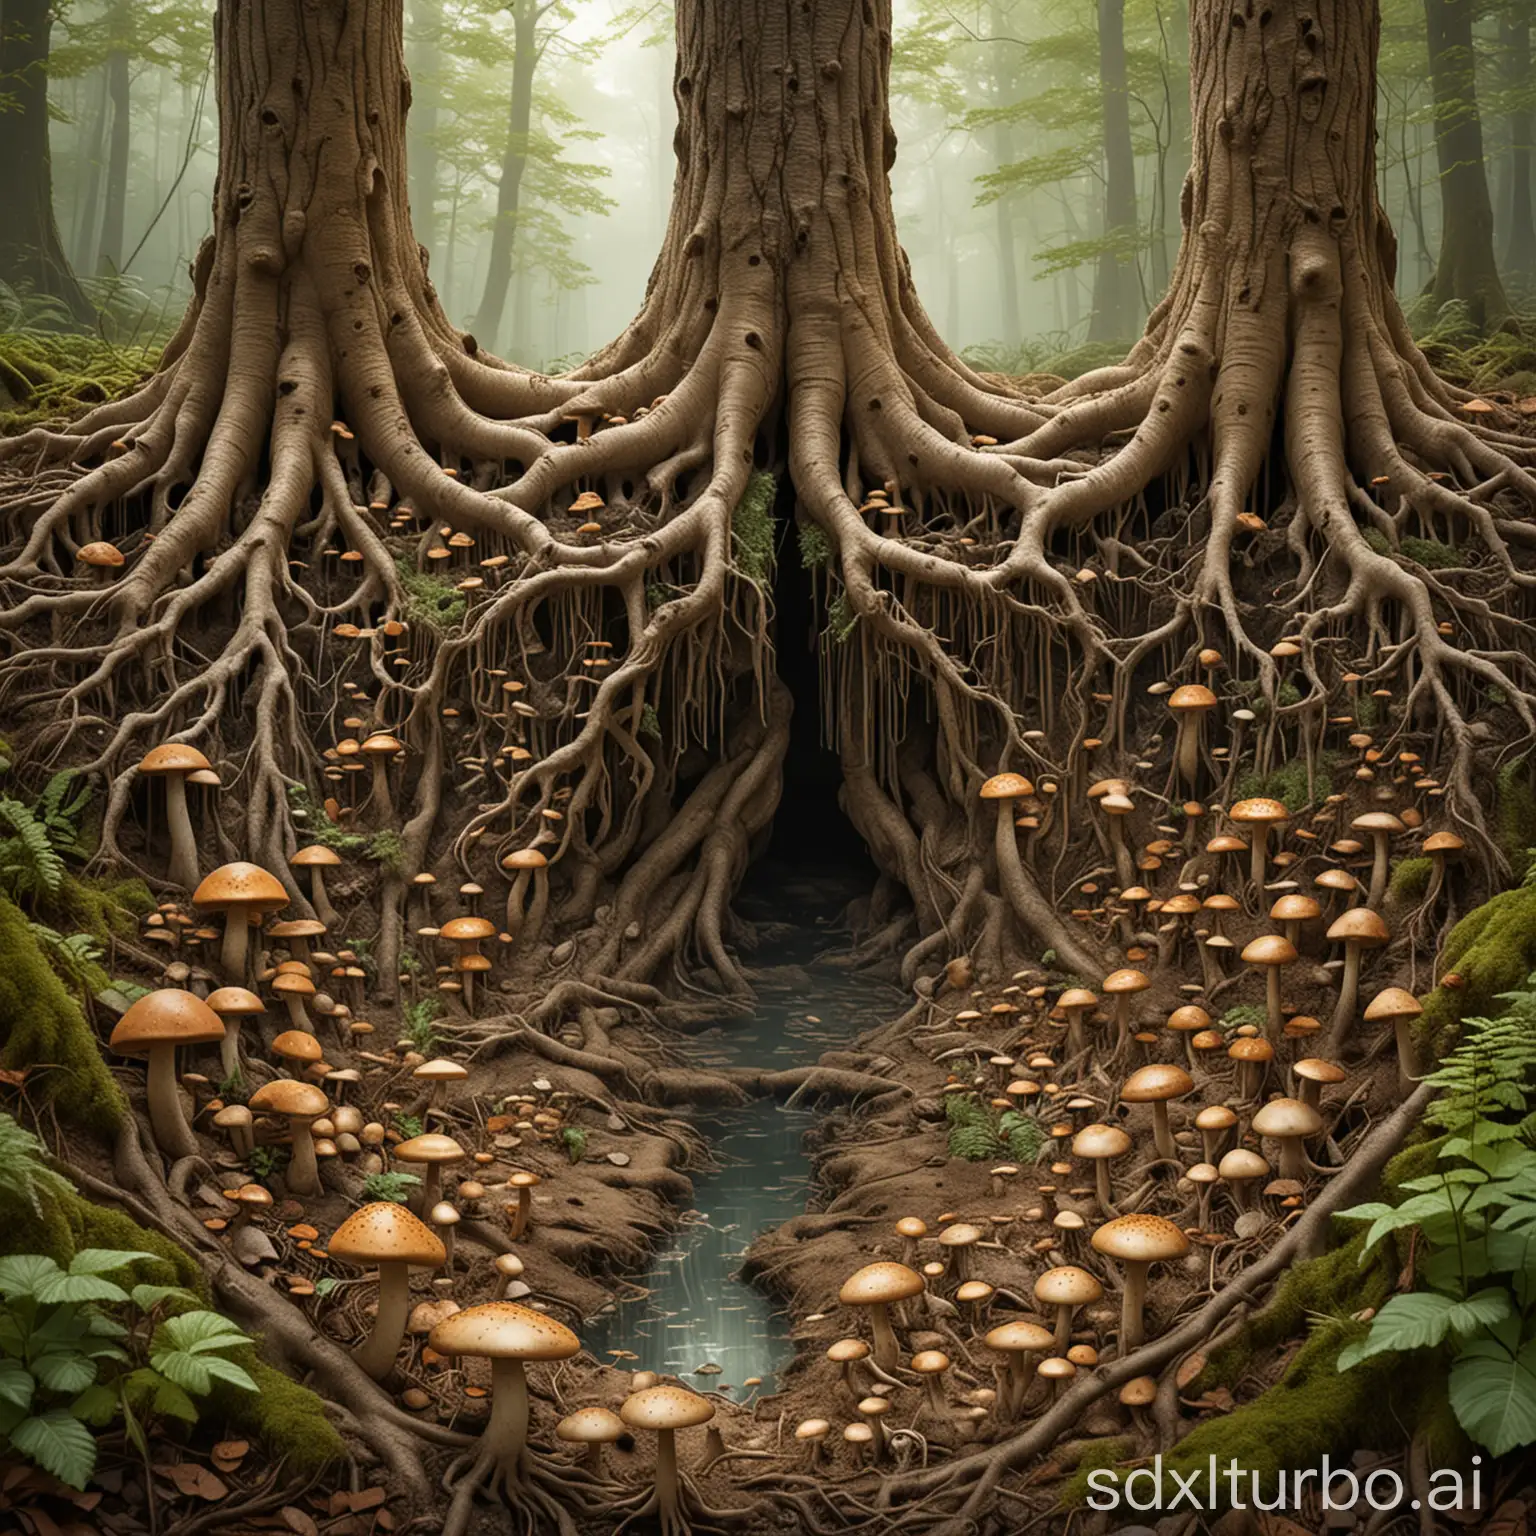 Underground forest scene showing interconnected tree roots and mushroom networks, illustration of nutrients and water sharing through tree root webby fungal strands.